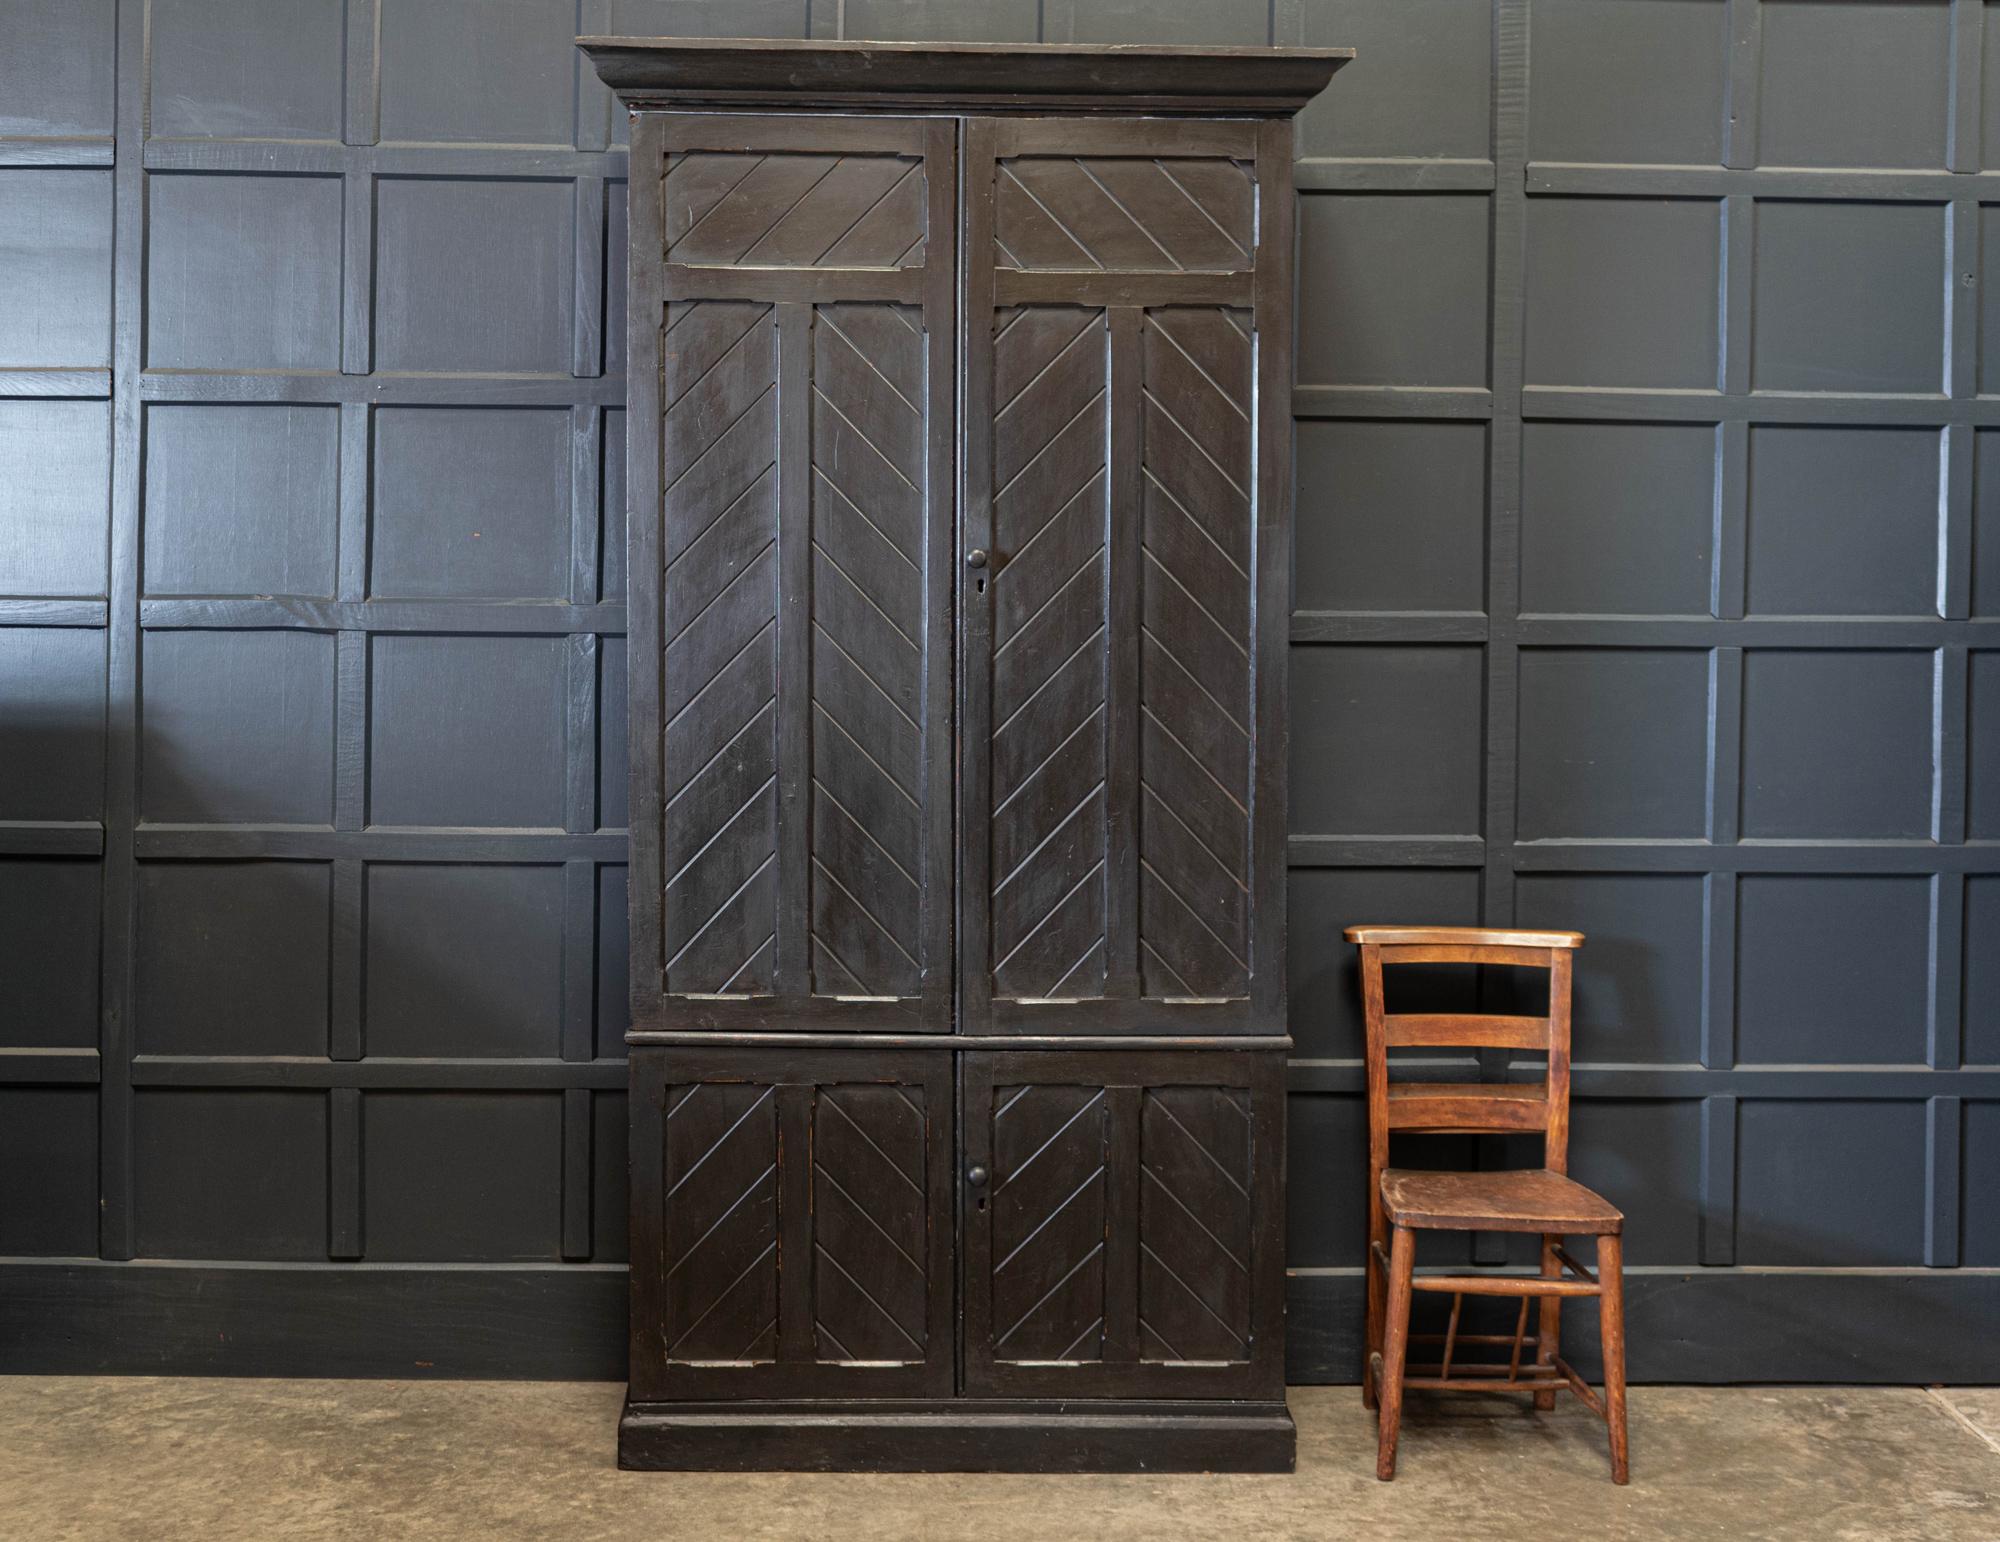 English 19th century ebonized tall church bible cupboard
circa 1880.

Church bible cupboard with herringbone pattern panelled doors.

Sourced from a church in York.

A great versatile piece with a narrow depth that could be ideal for a